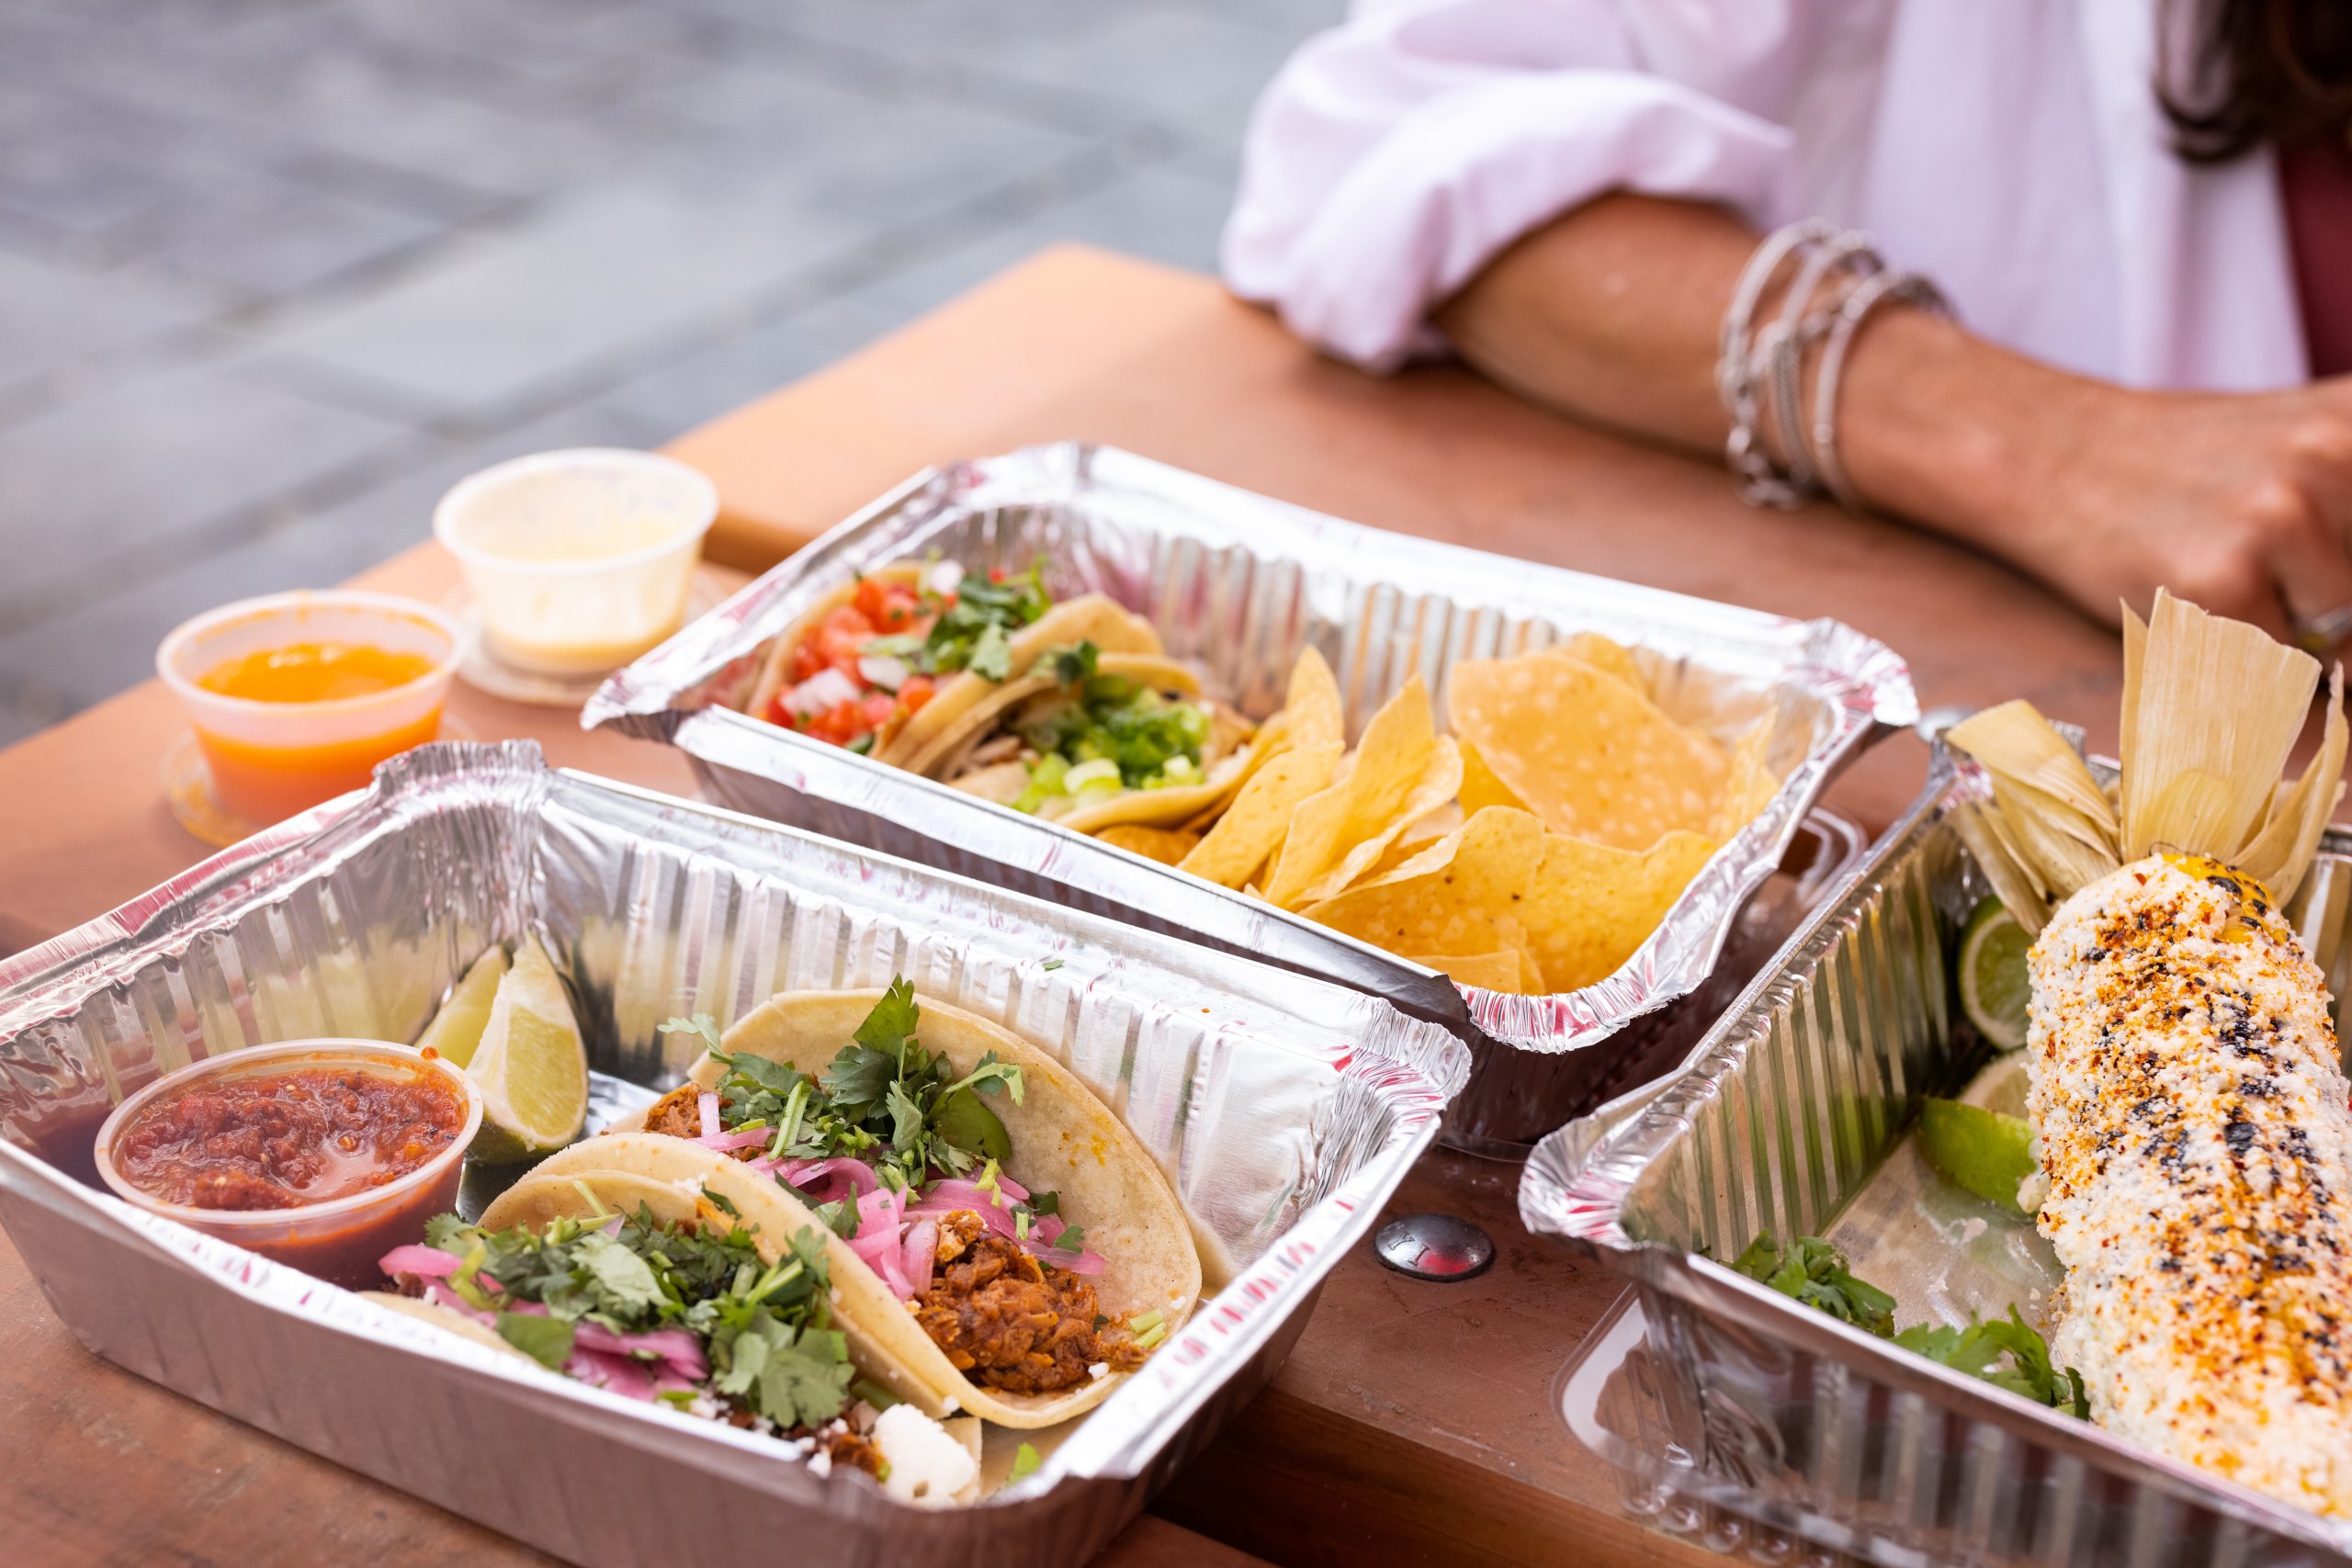 full trays of food show off mouthwatering tacos with salsa and lime, chips and dips, and Mexican street corn